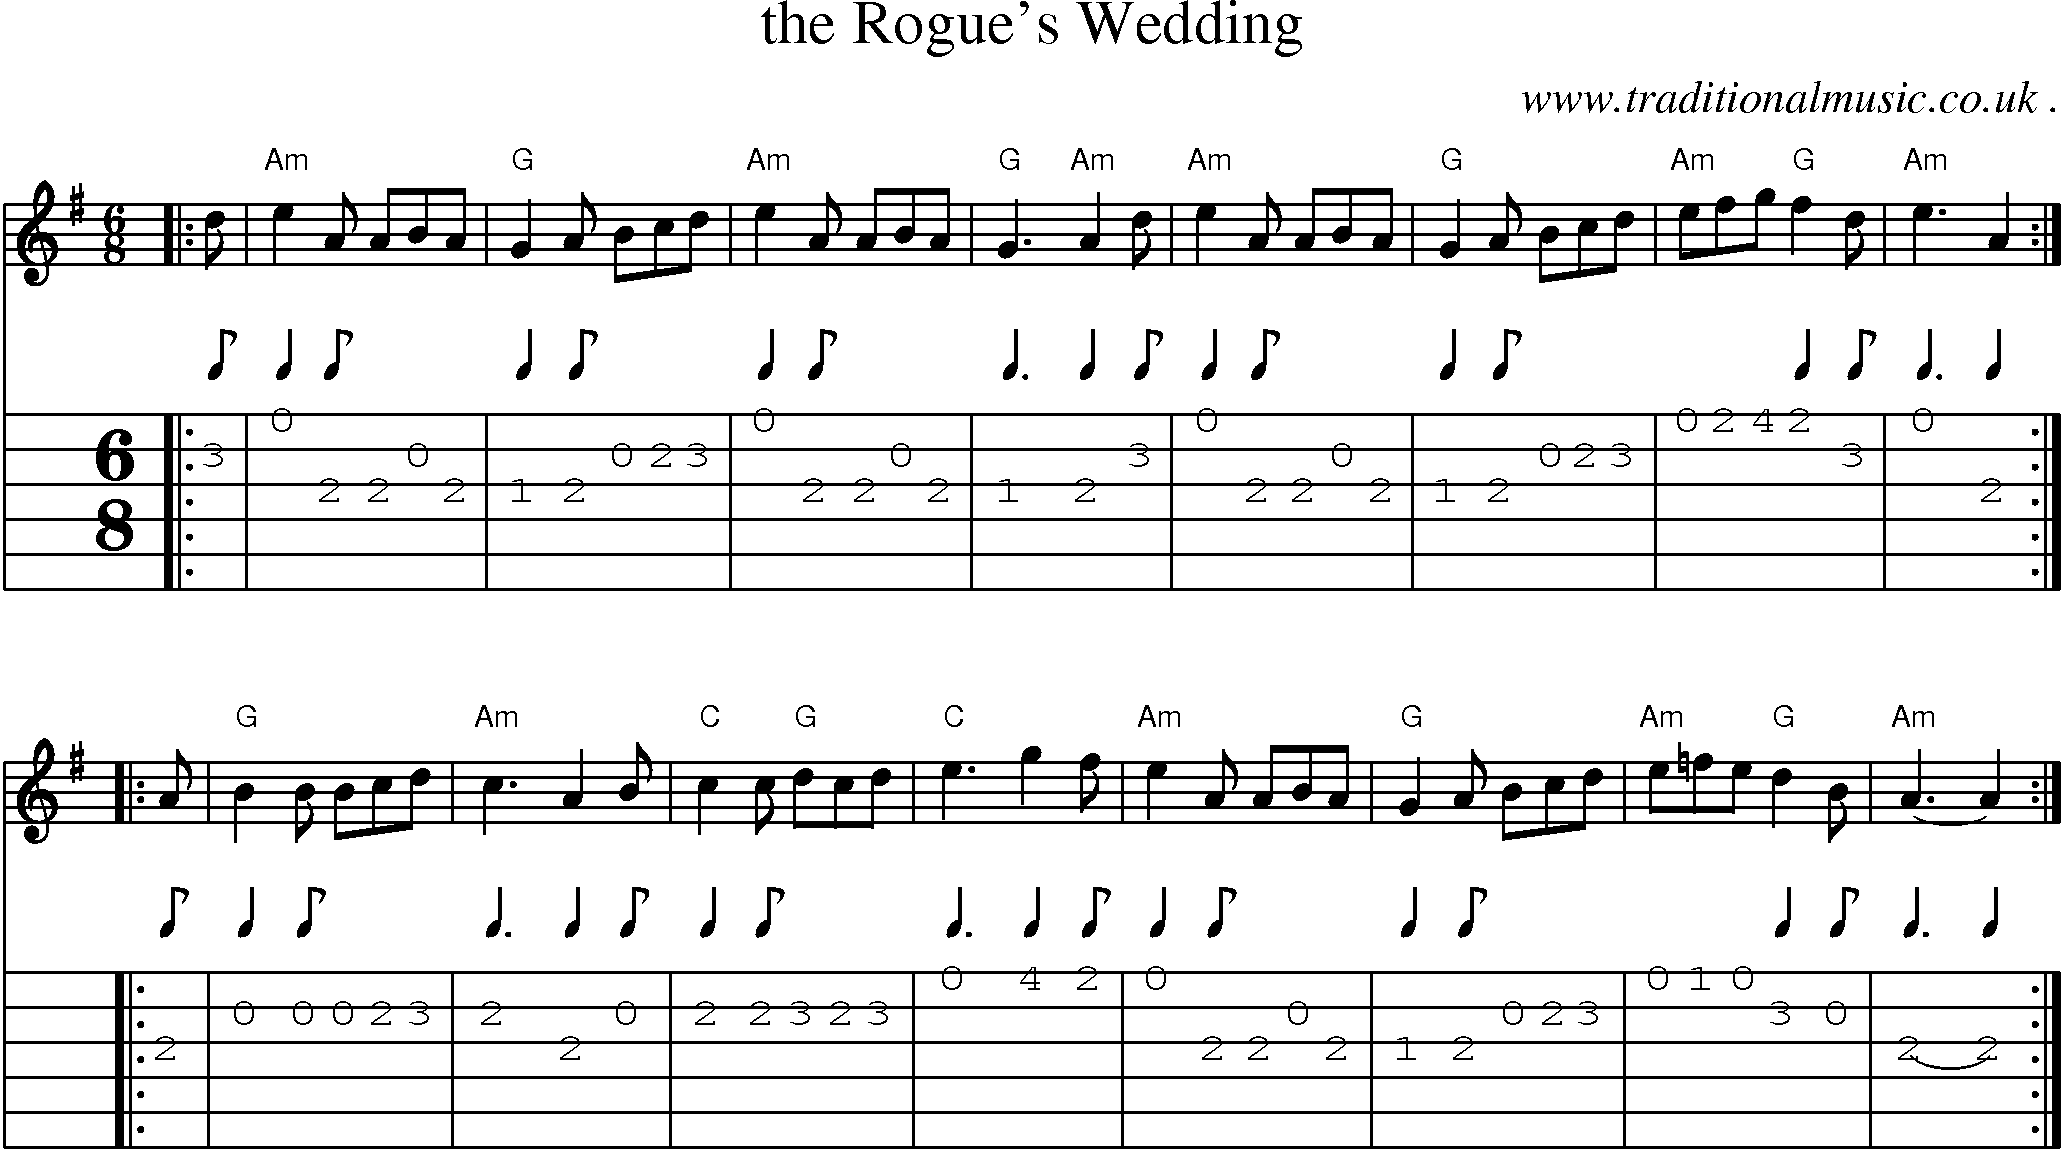 Sheet-music  score, Chords and Guitar Tabs for The Rogues Wedding